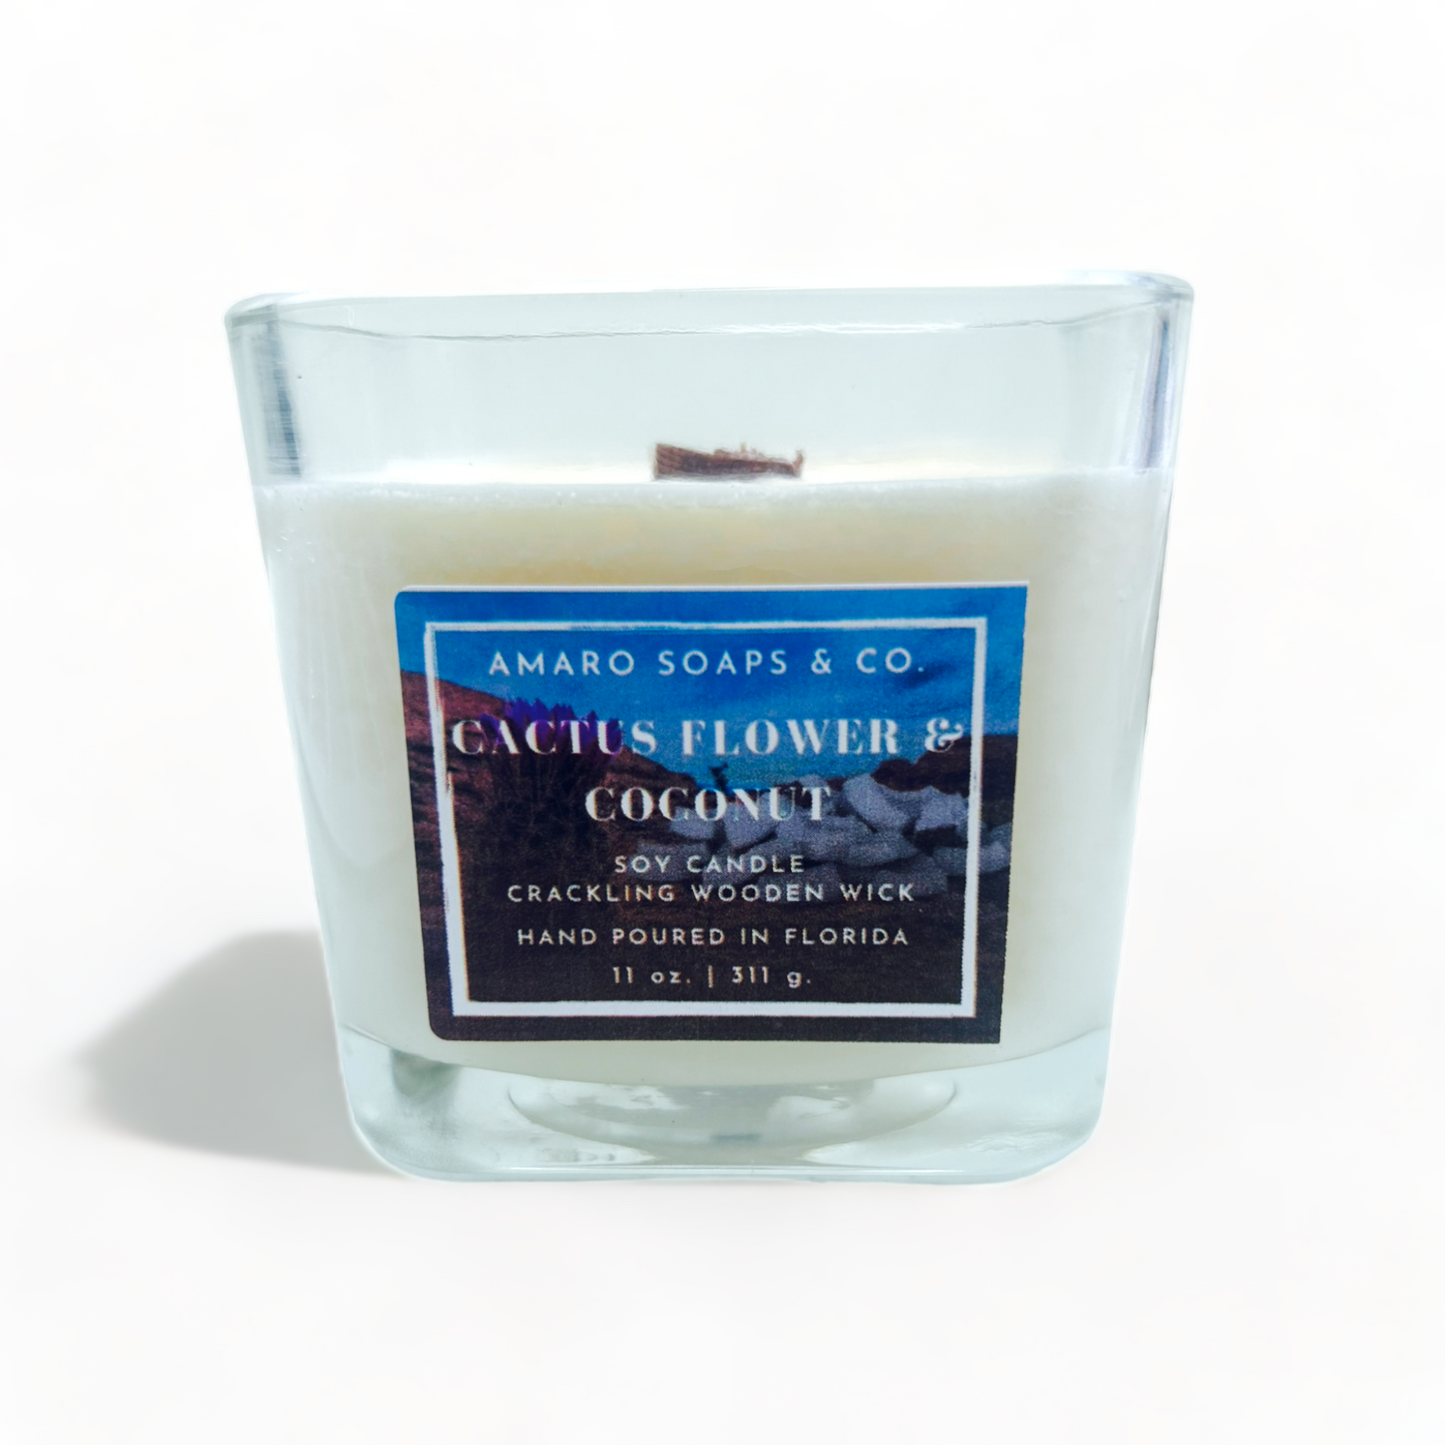 Cactus Flower & Coconut Wooden Wick Soy Candle